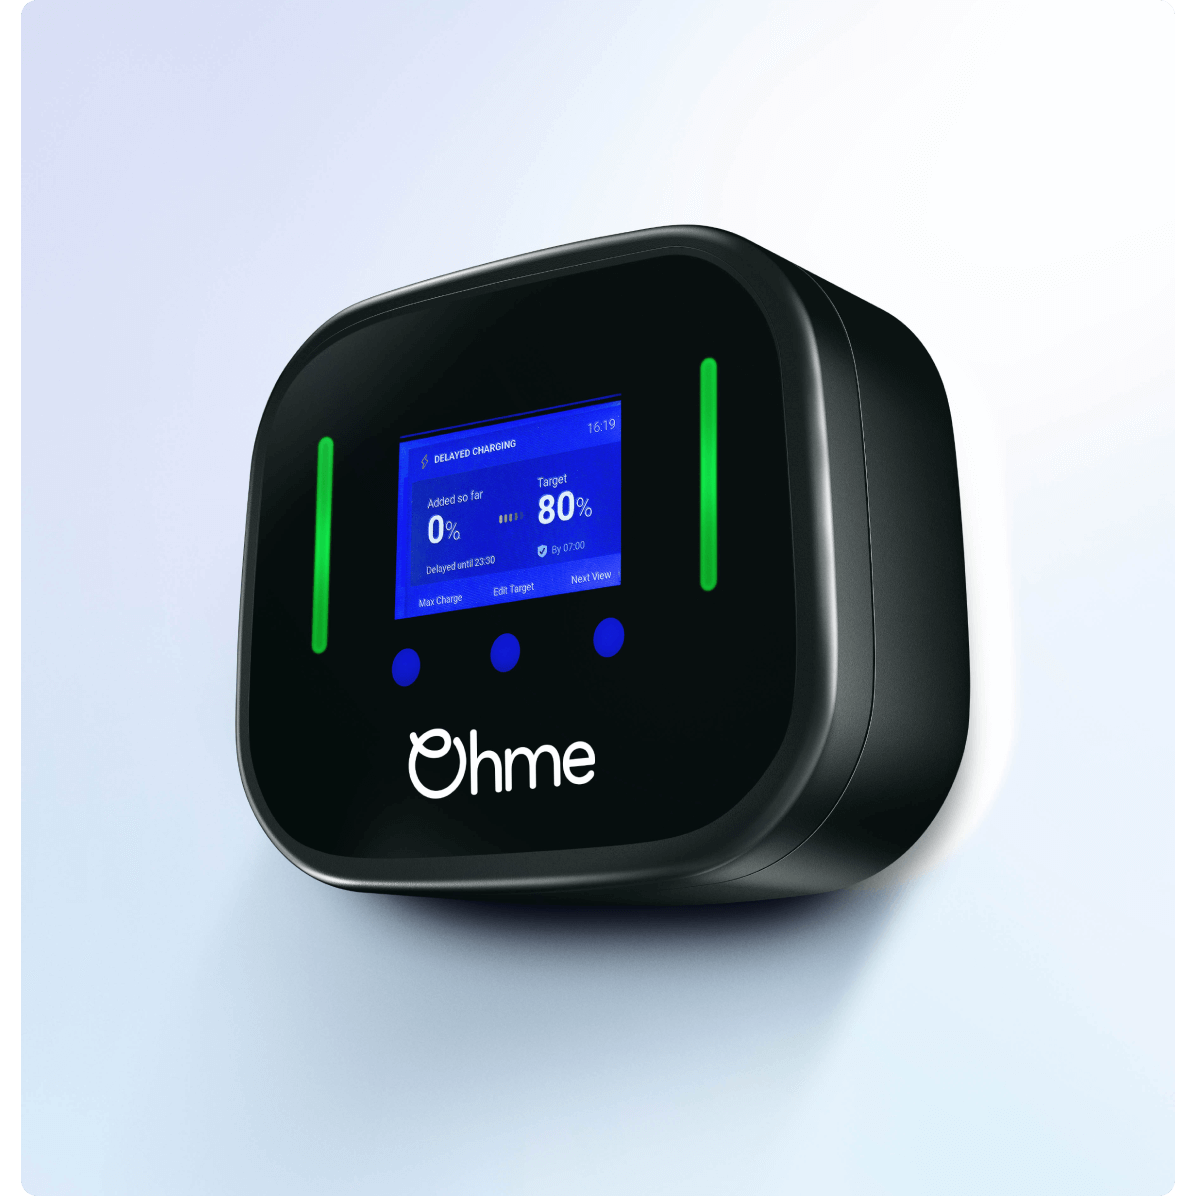 Ohme OHME0002GB002 7.4kW Home Pro Smart EV Charger with 5 Metre Cable